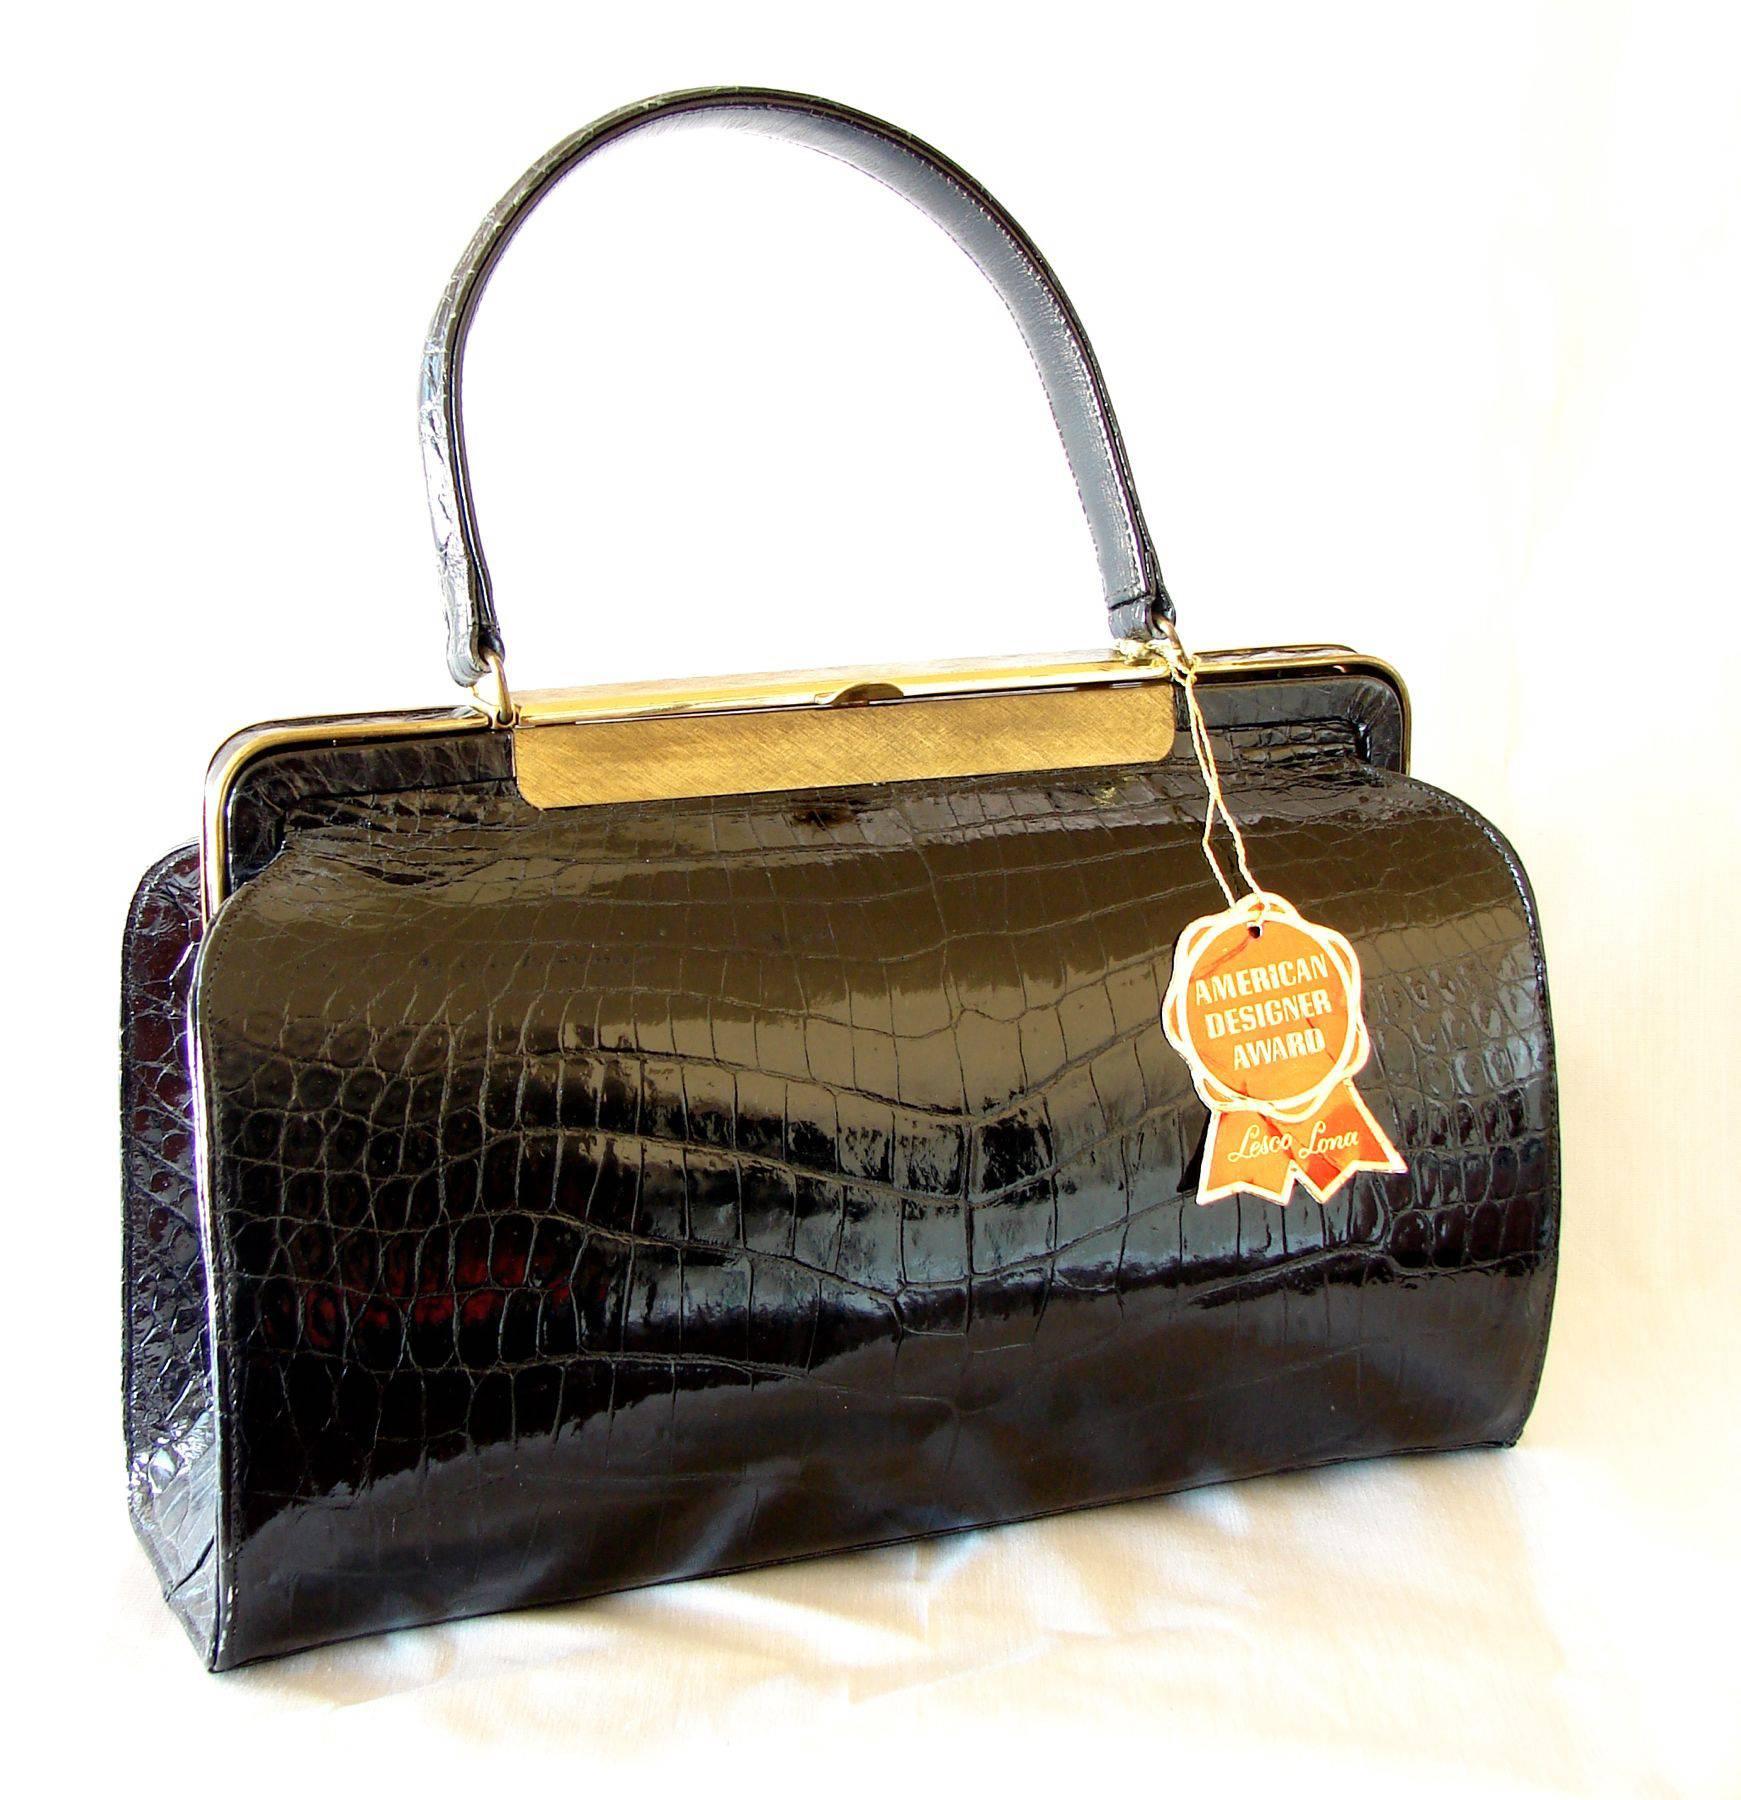 Fancy black exotic crocodile handbag from Lesco Lona dates to the early 1960s.  Known for their exotic skin bags, this piece is a great example of their quality craftsmanship.  The exterior is black shiny crocodile with gold hardware, and inside